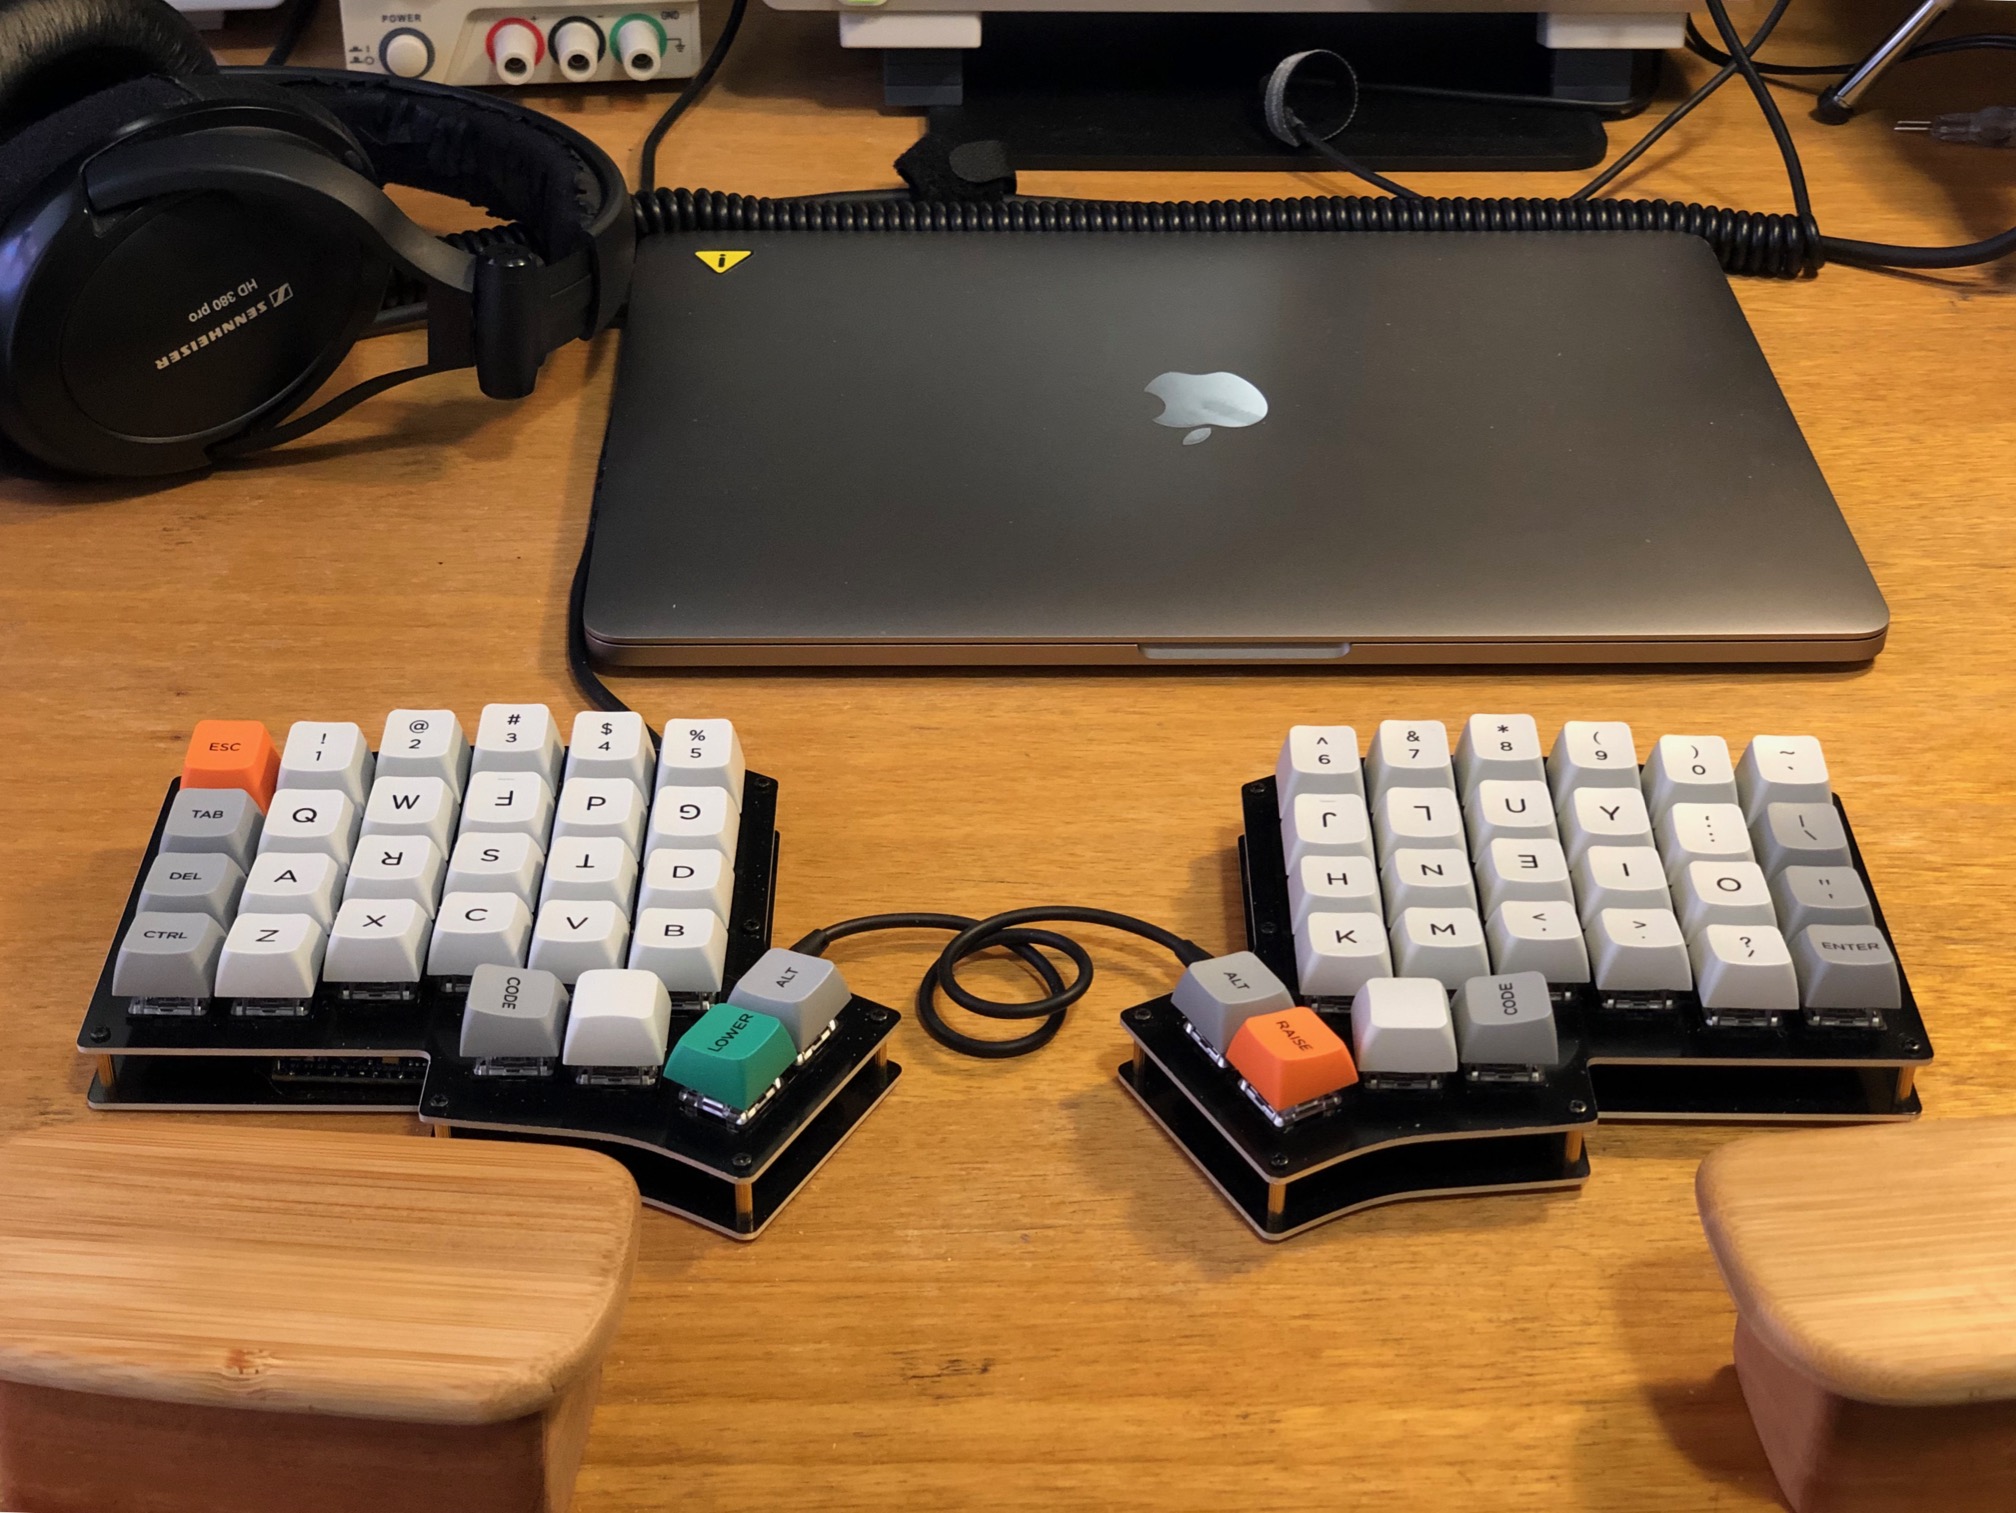 Keyboard on desk with laptop, headphones and wrist rests visible